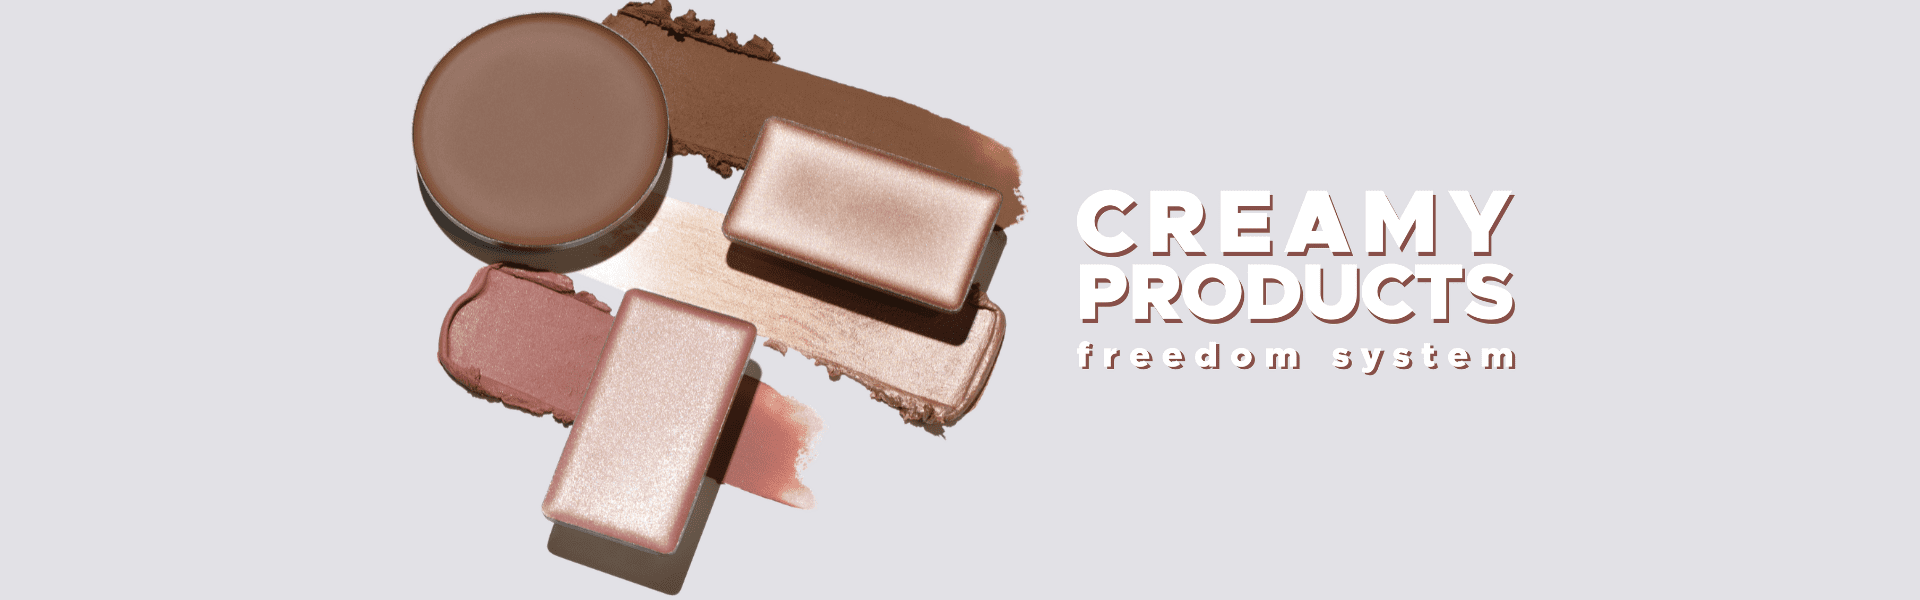 creamy products